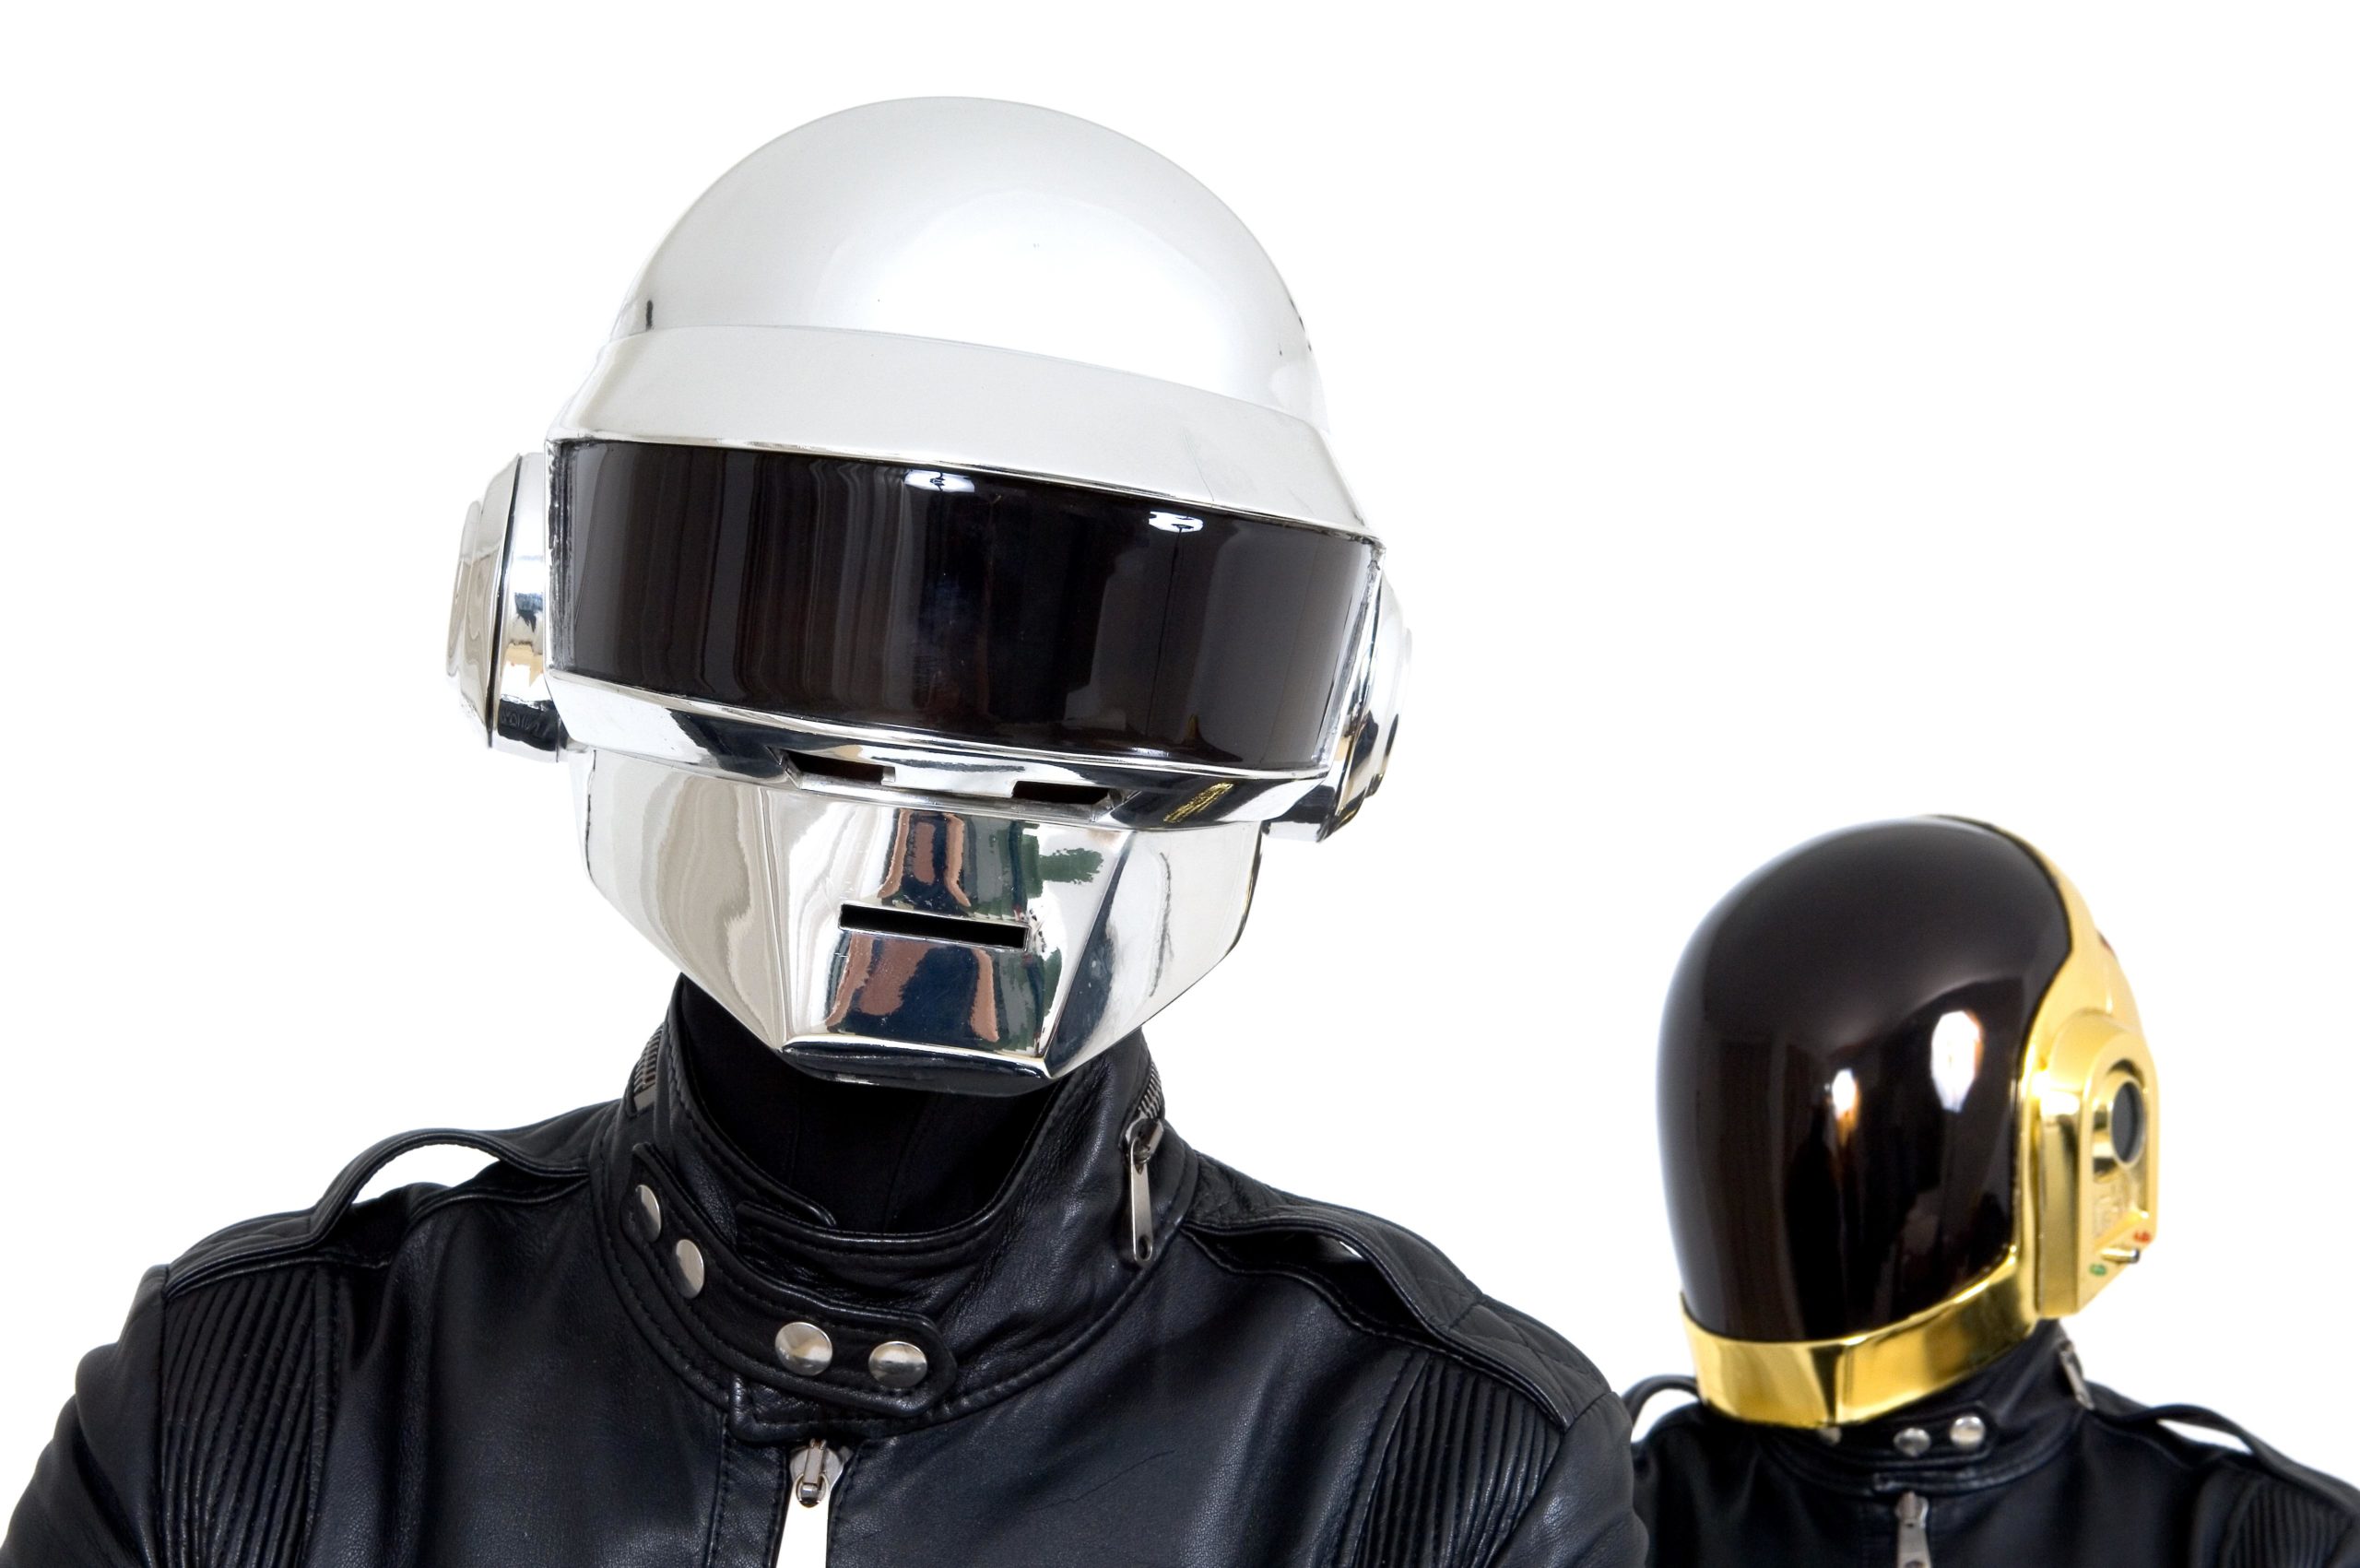 Daft Punk Was About Nostalgia, Not the Future